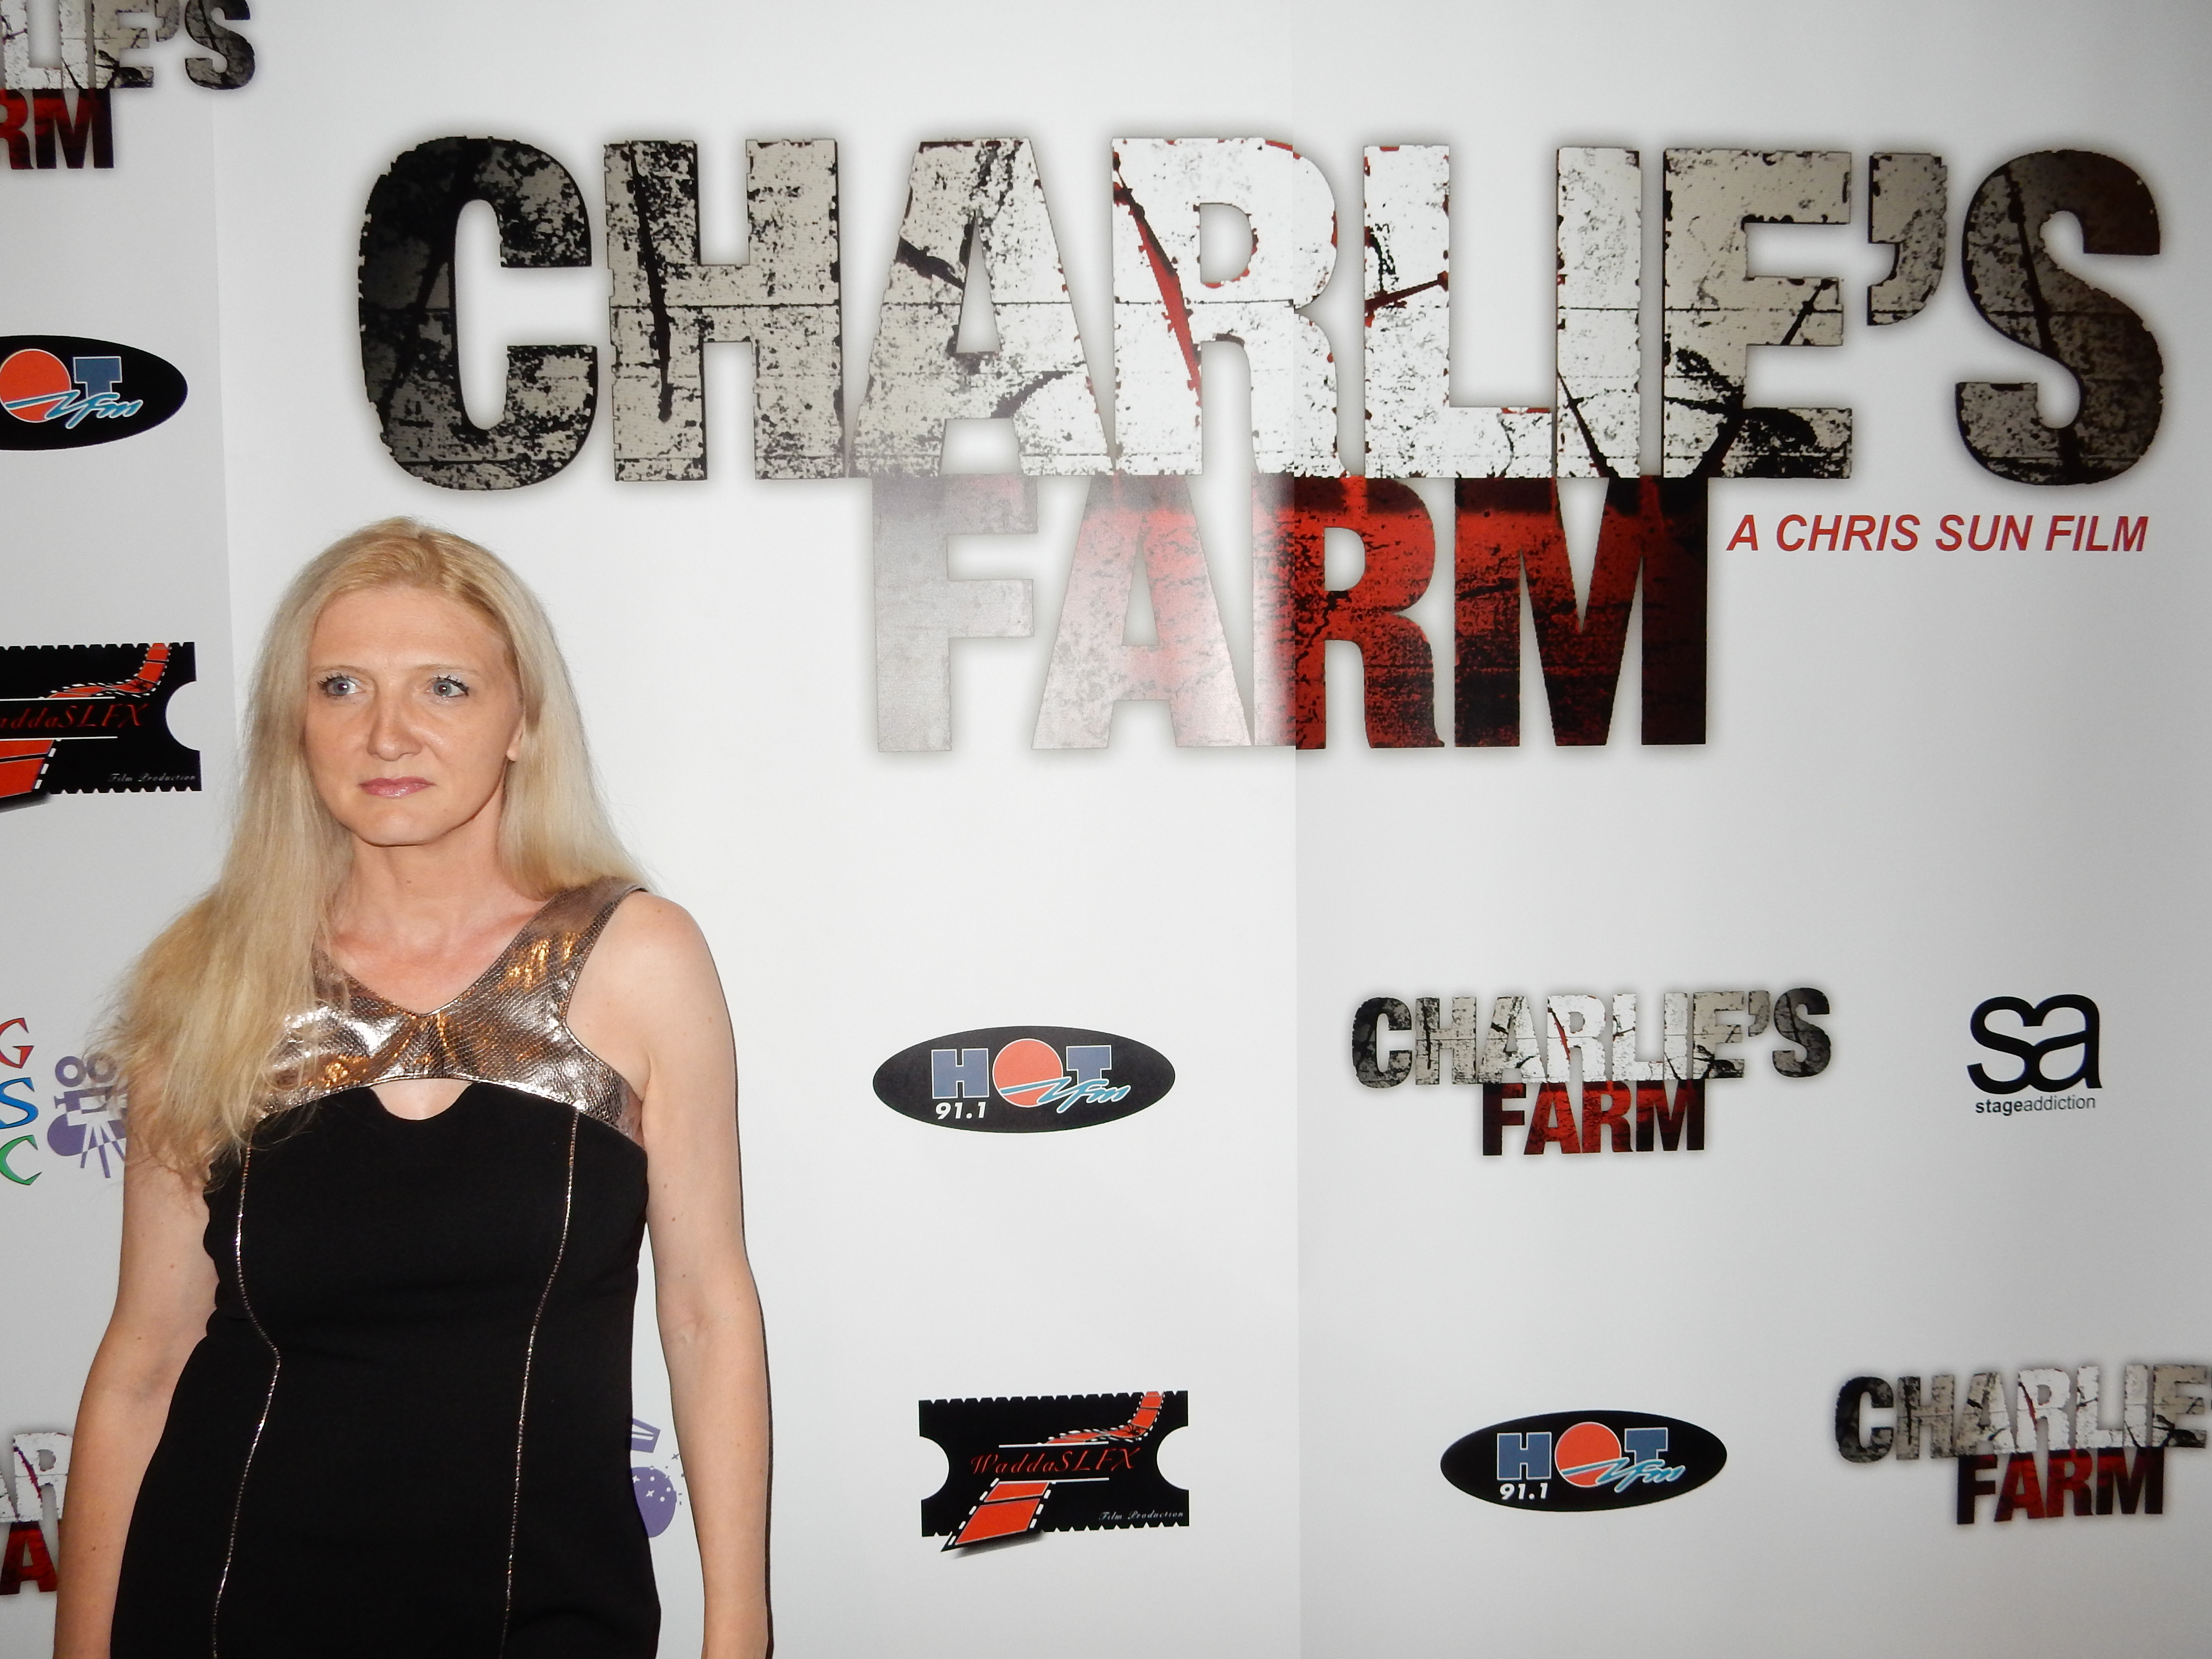 Toni McGhee at the premiere of 'Charlie's Farm'.